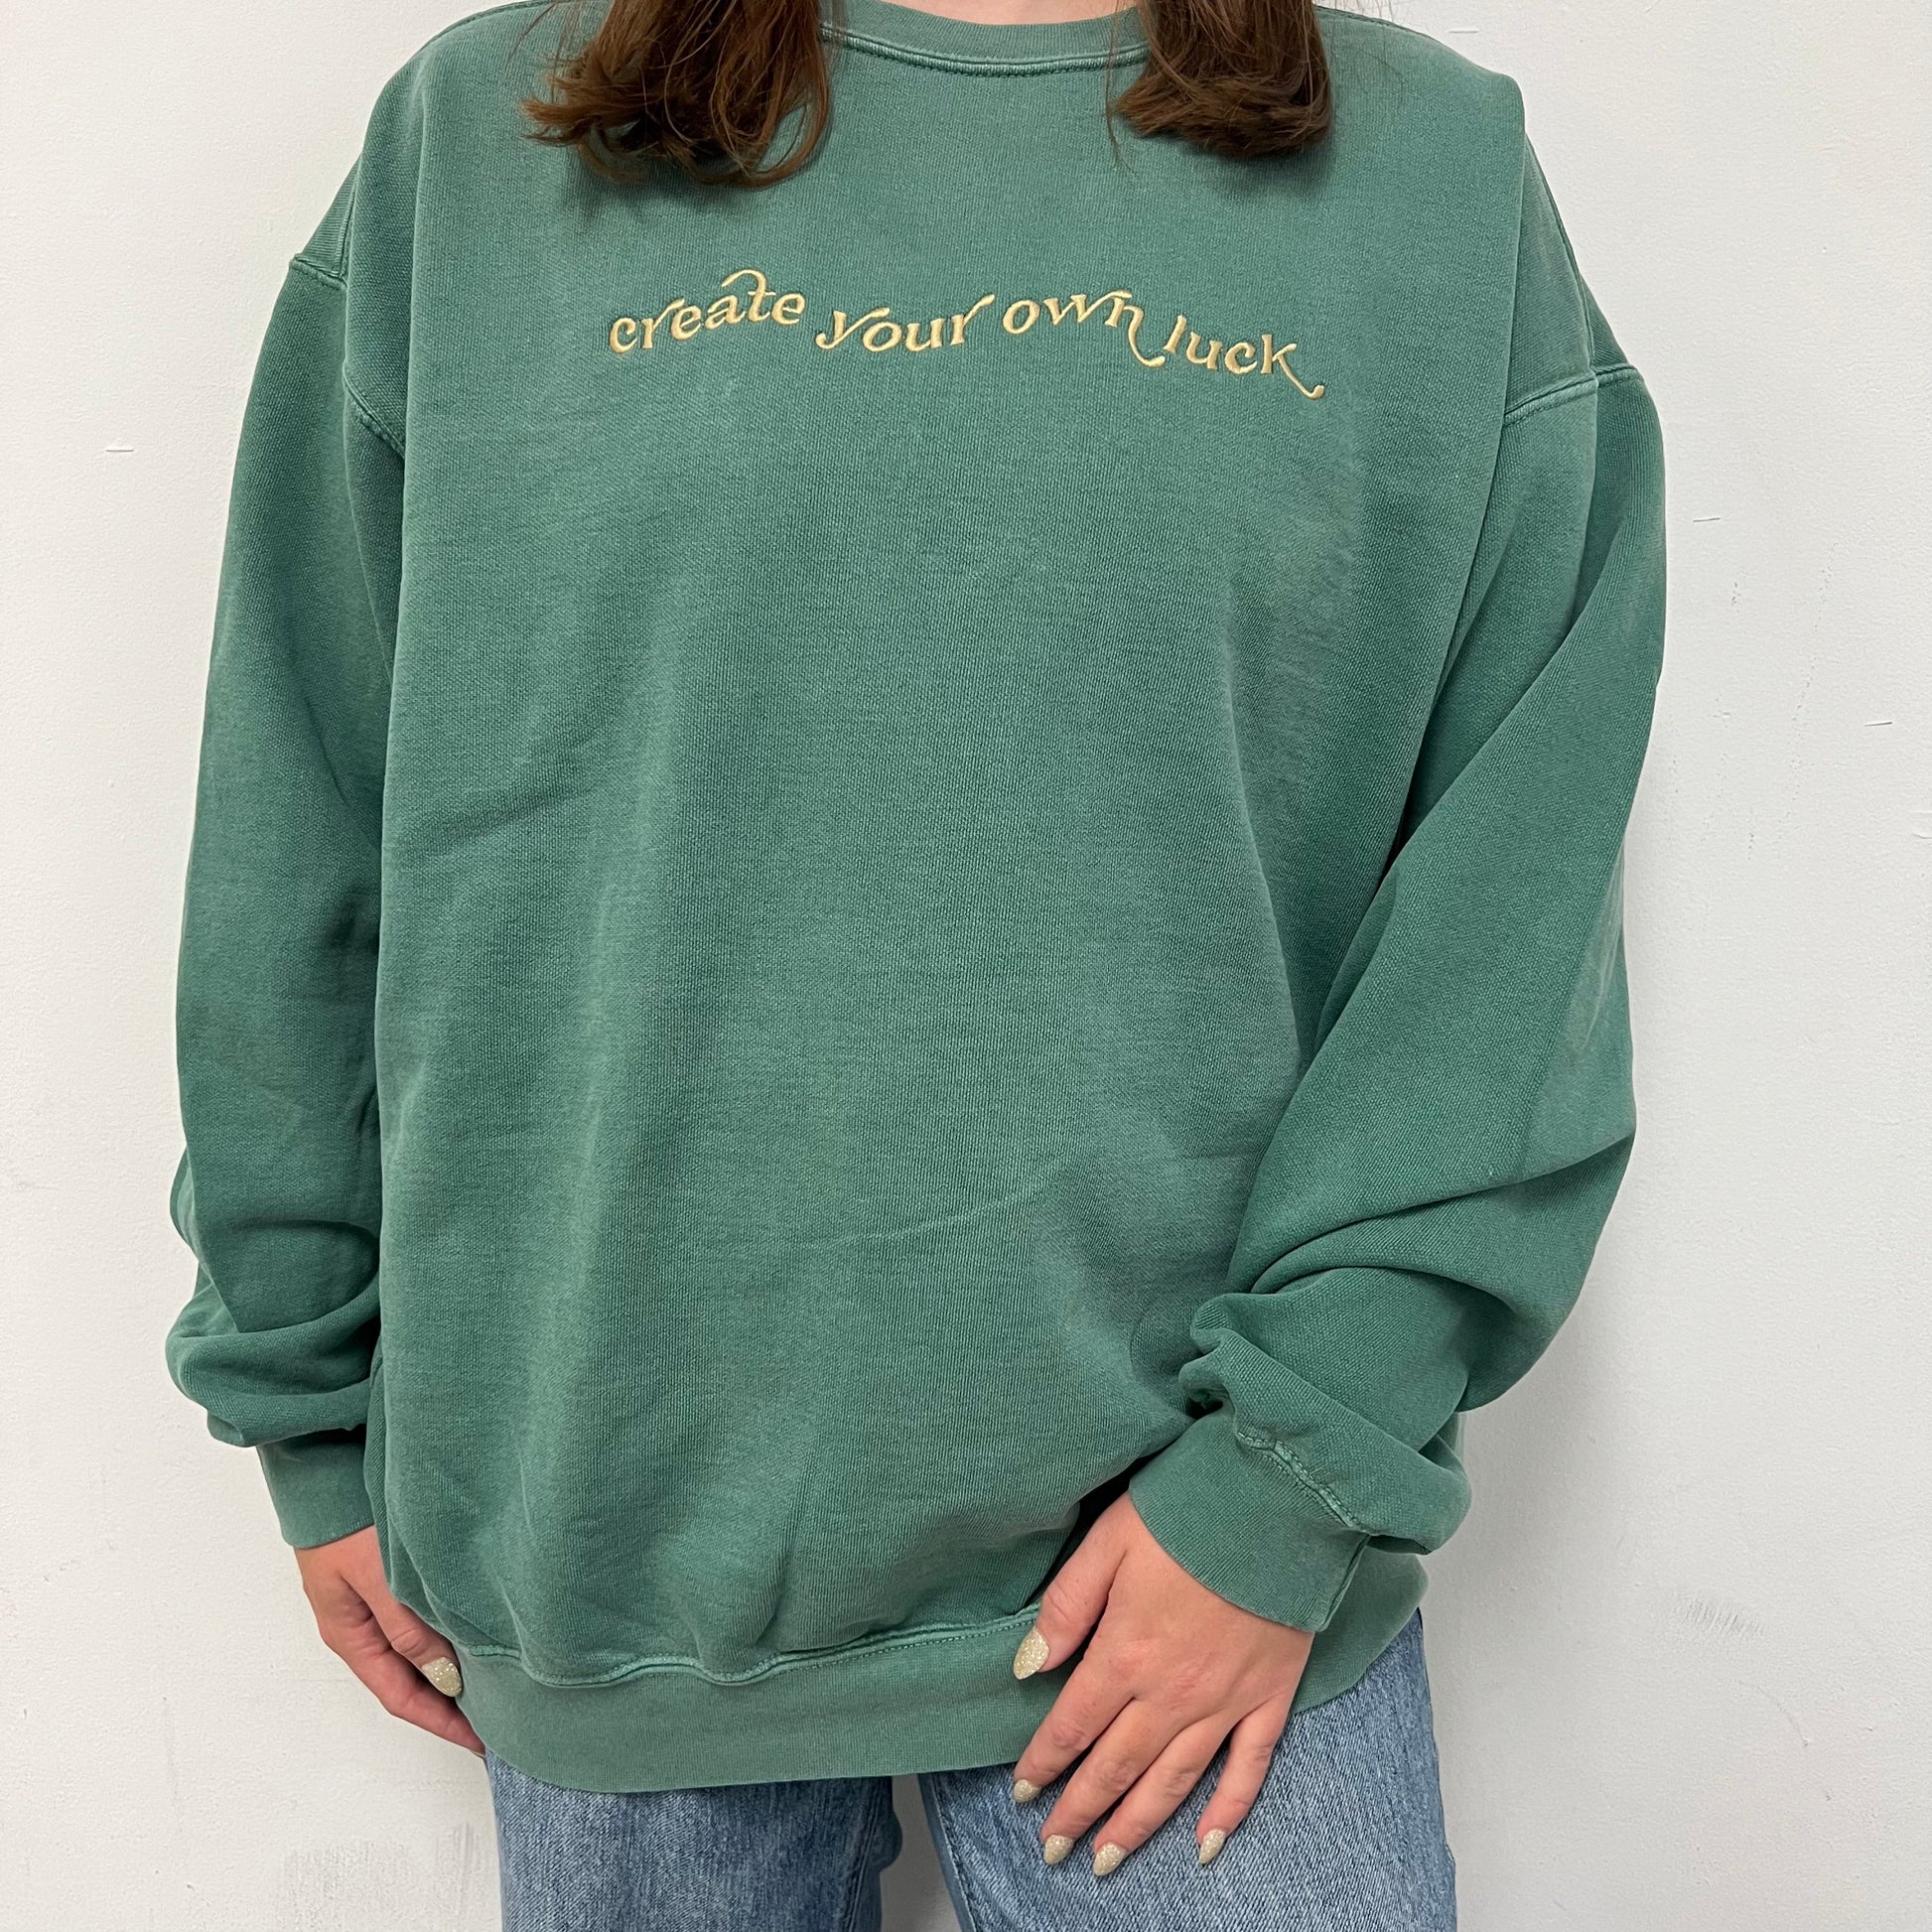 Crewneck Embroidered Sweatshir Luxe Your Green Own Luck Create Boutique Maddie Green Comfort –